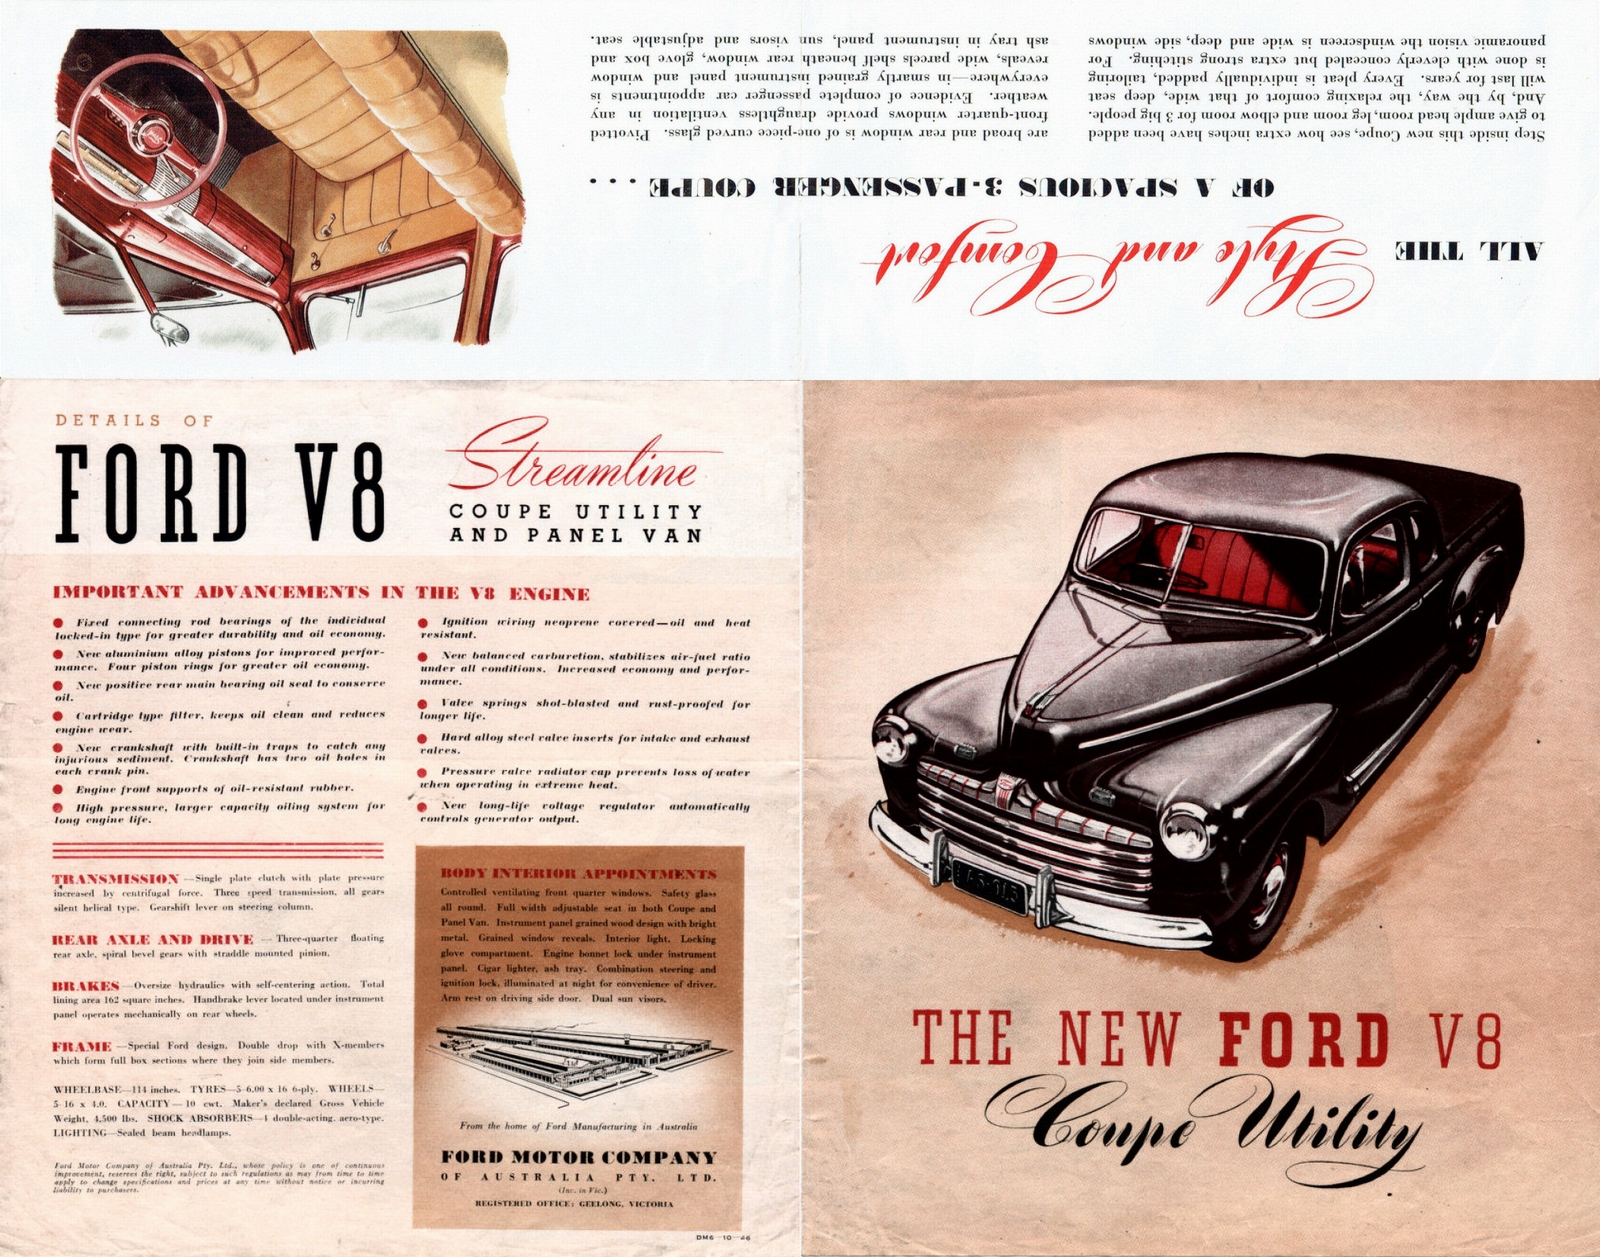 n_1947 Ford Commercial Vehicles (Aus)-Side A1.jpg